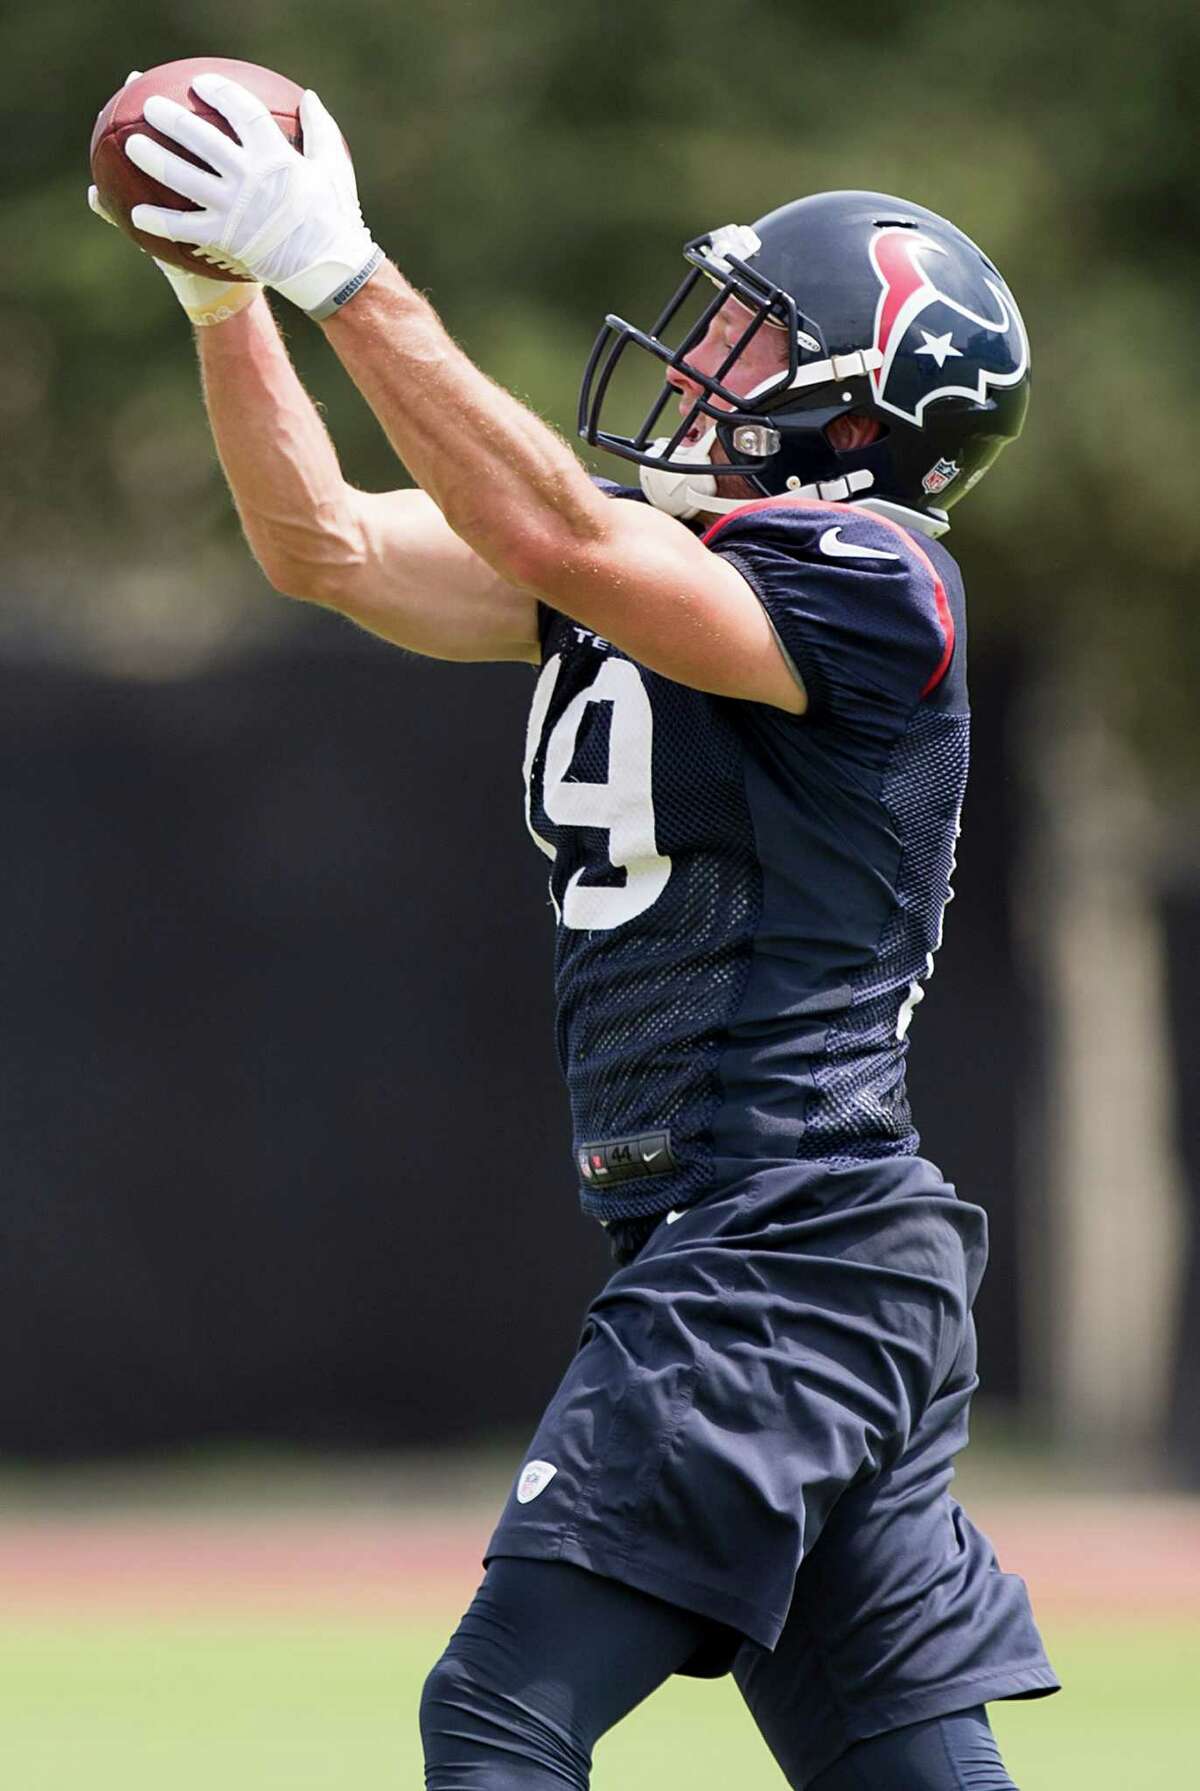 Texans wide receiver Travis Labhart long ago learned to play bigger than his 5-9 frame would suggest to most.